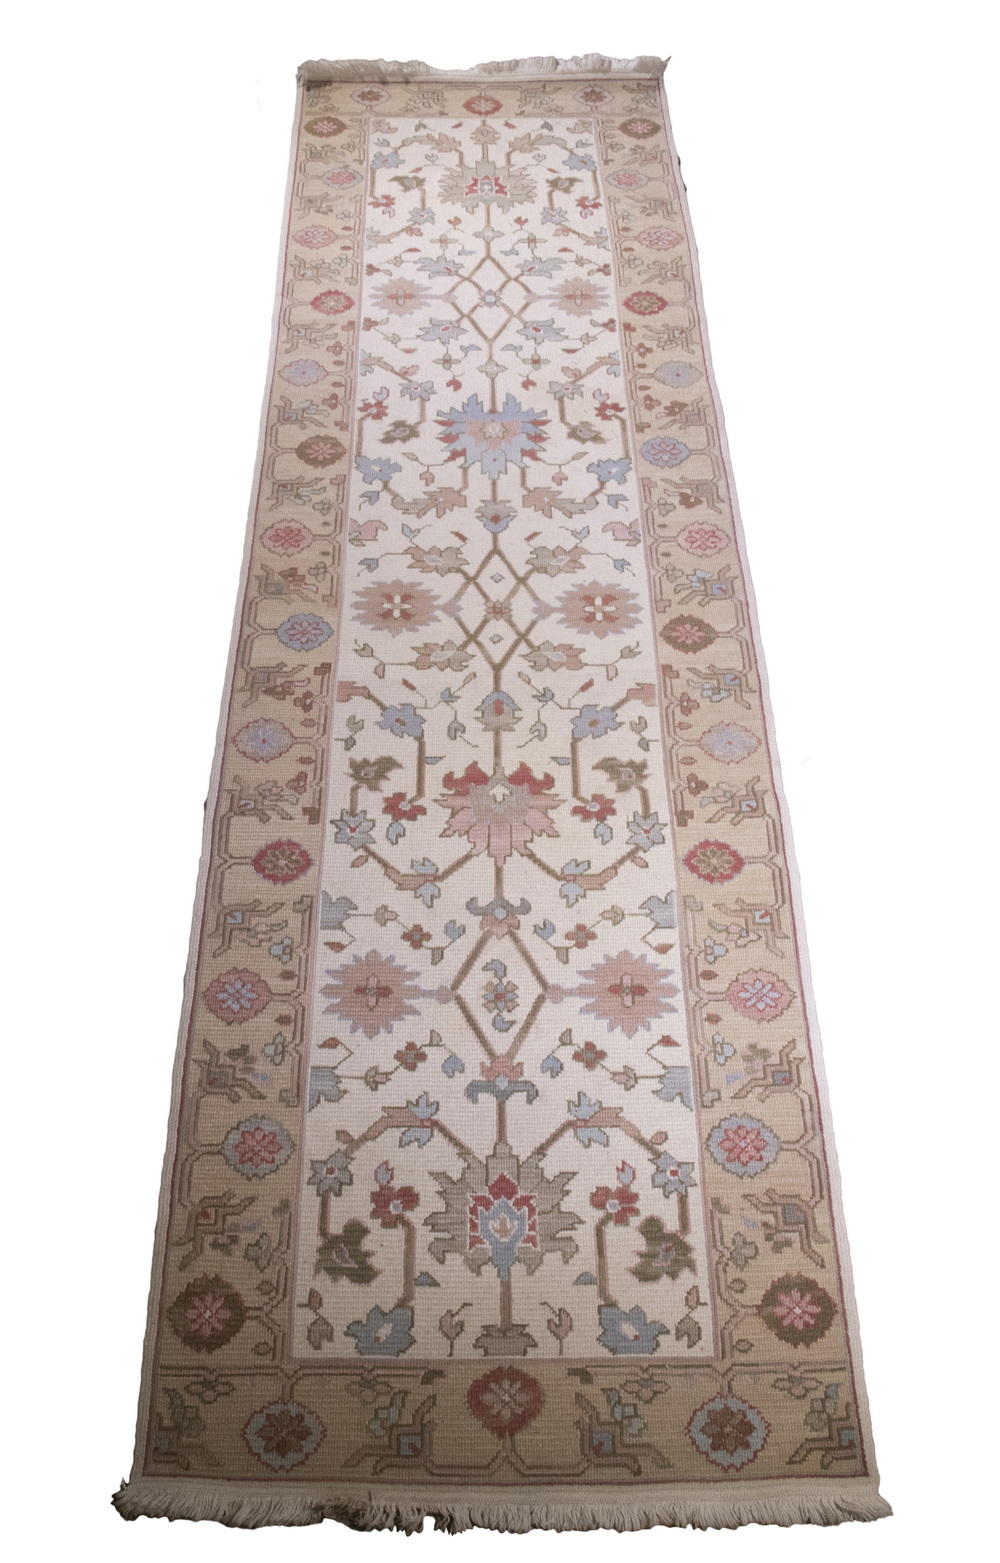 INDIAN CHAIN STITCHED RUNNER (2'7"